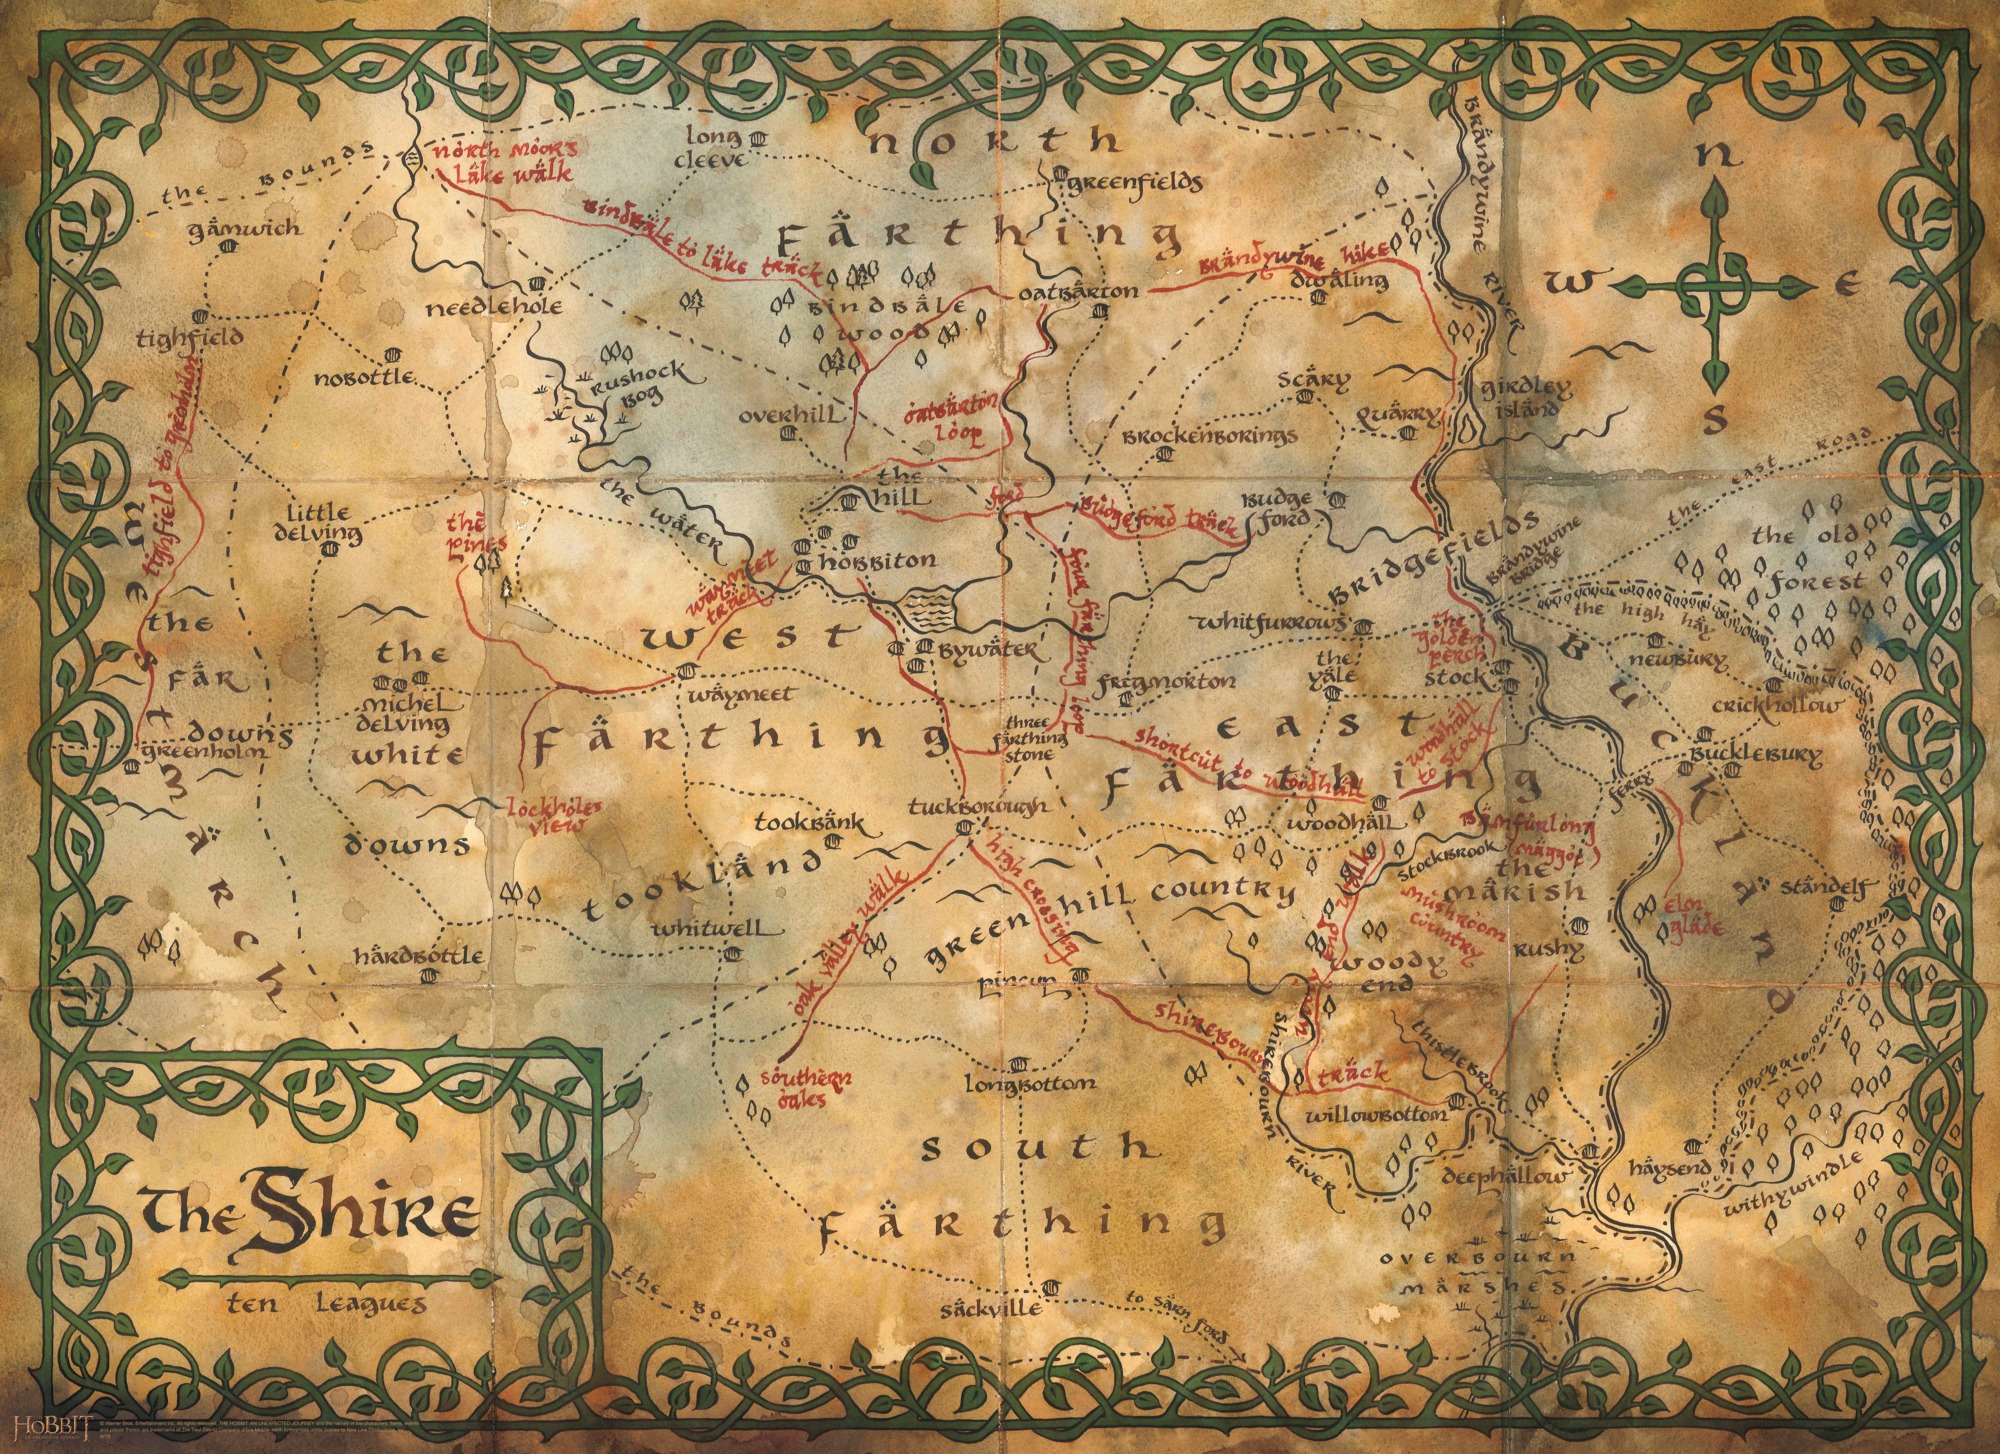 Map Of The Shire Middle Earth Wall Mural Hobbit